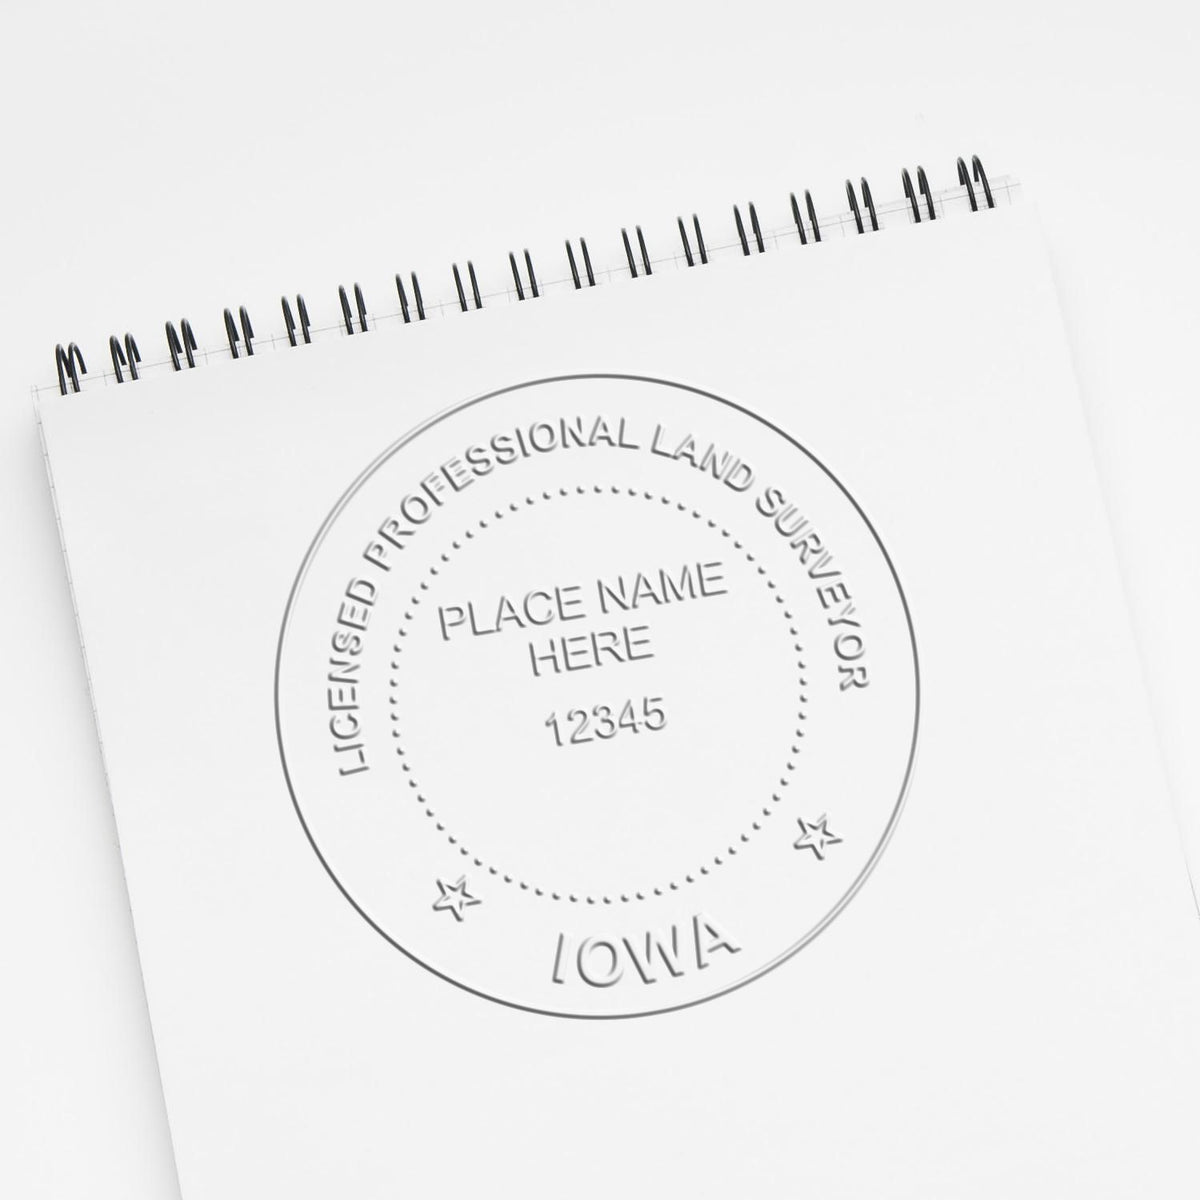 Another Example of a stamped impression of the State of Iowa Soft Land Surveyor Embossing Seal on a piece of office paper.